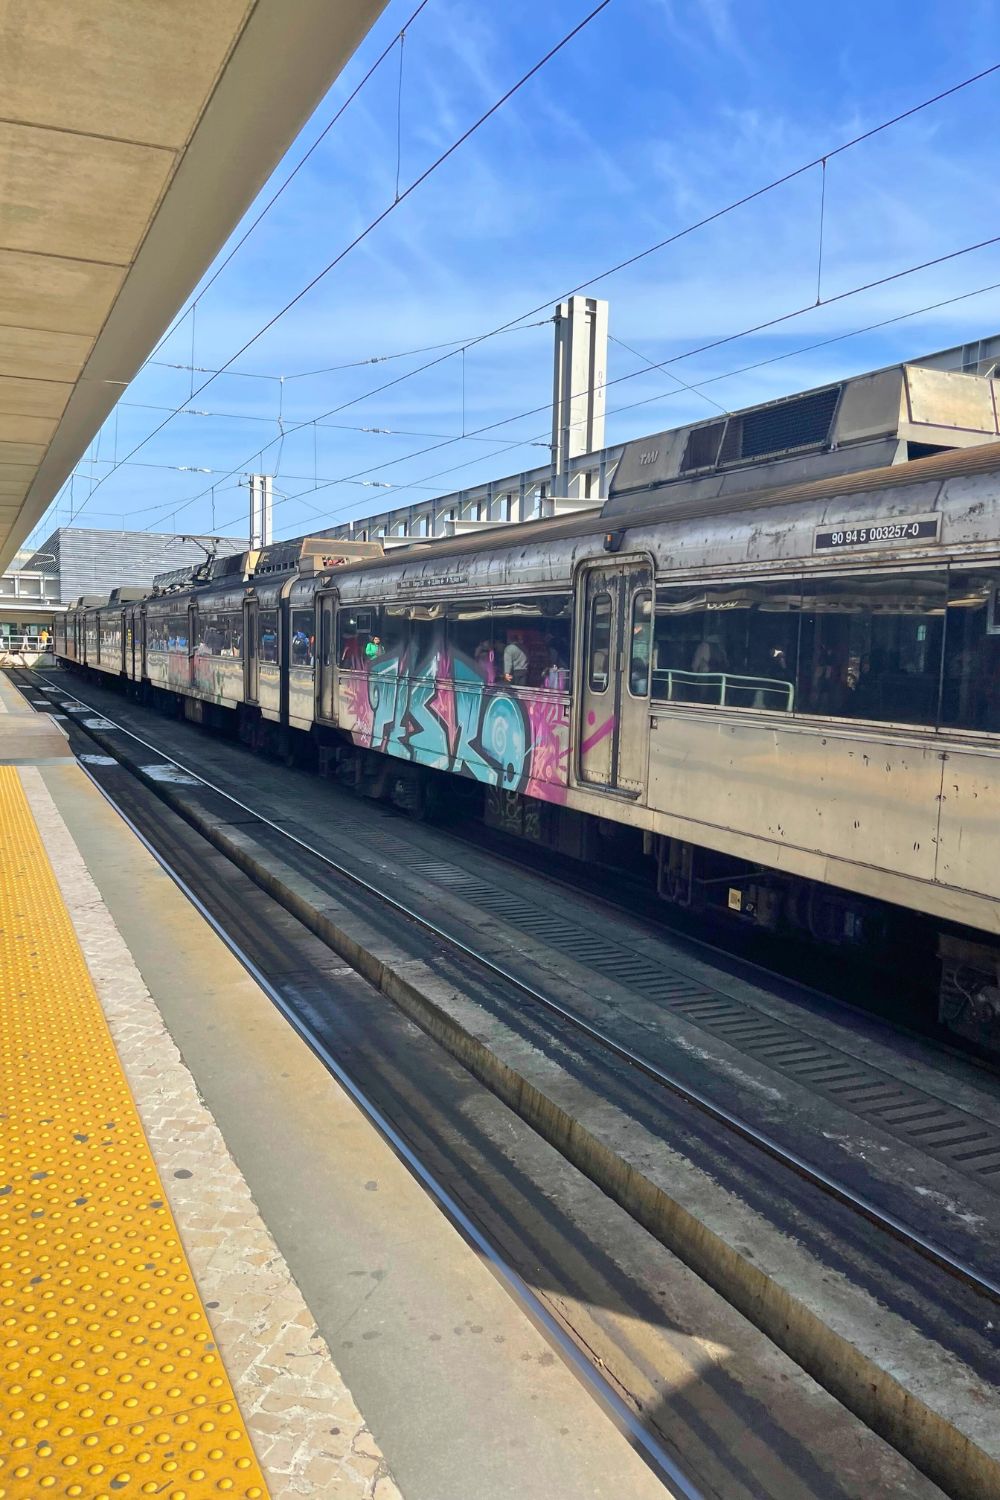 A commuter train adorned with vibrant graffiti stands idle on the tracks at a station, framed by the station's modern, clean architecture and the overhead lines that power its journey. The image captures a moment of stillness in the everyday hustle of city transit.